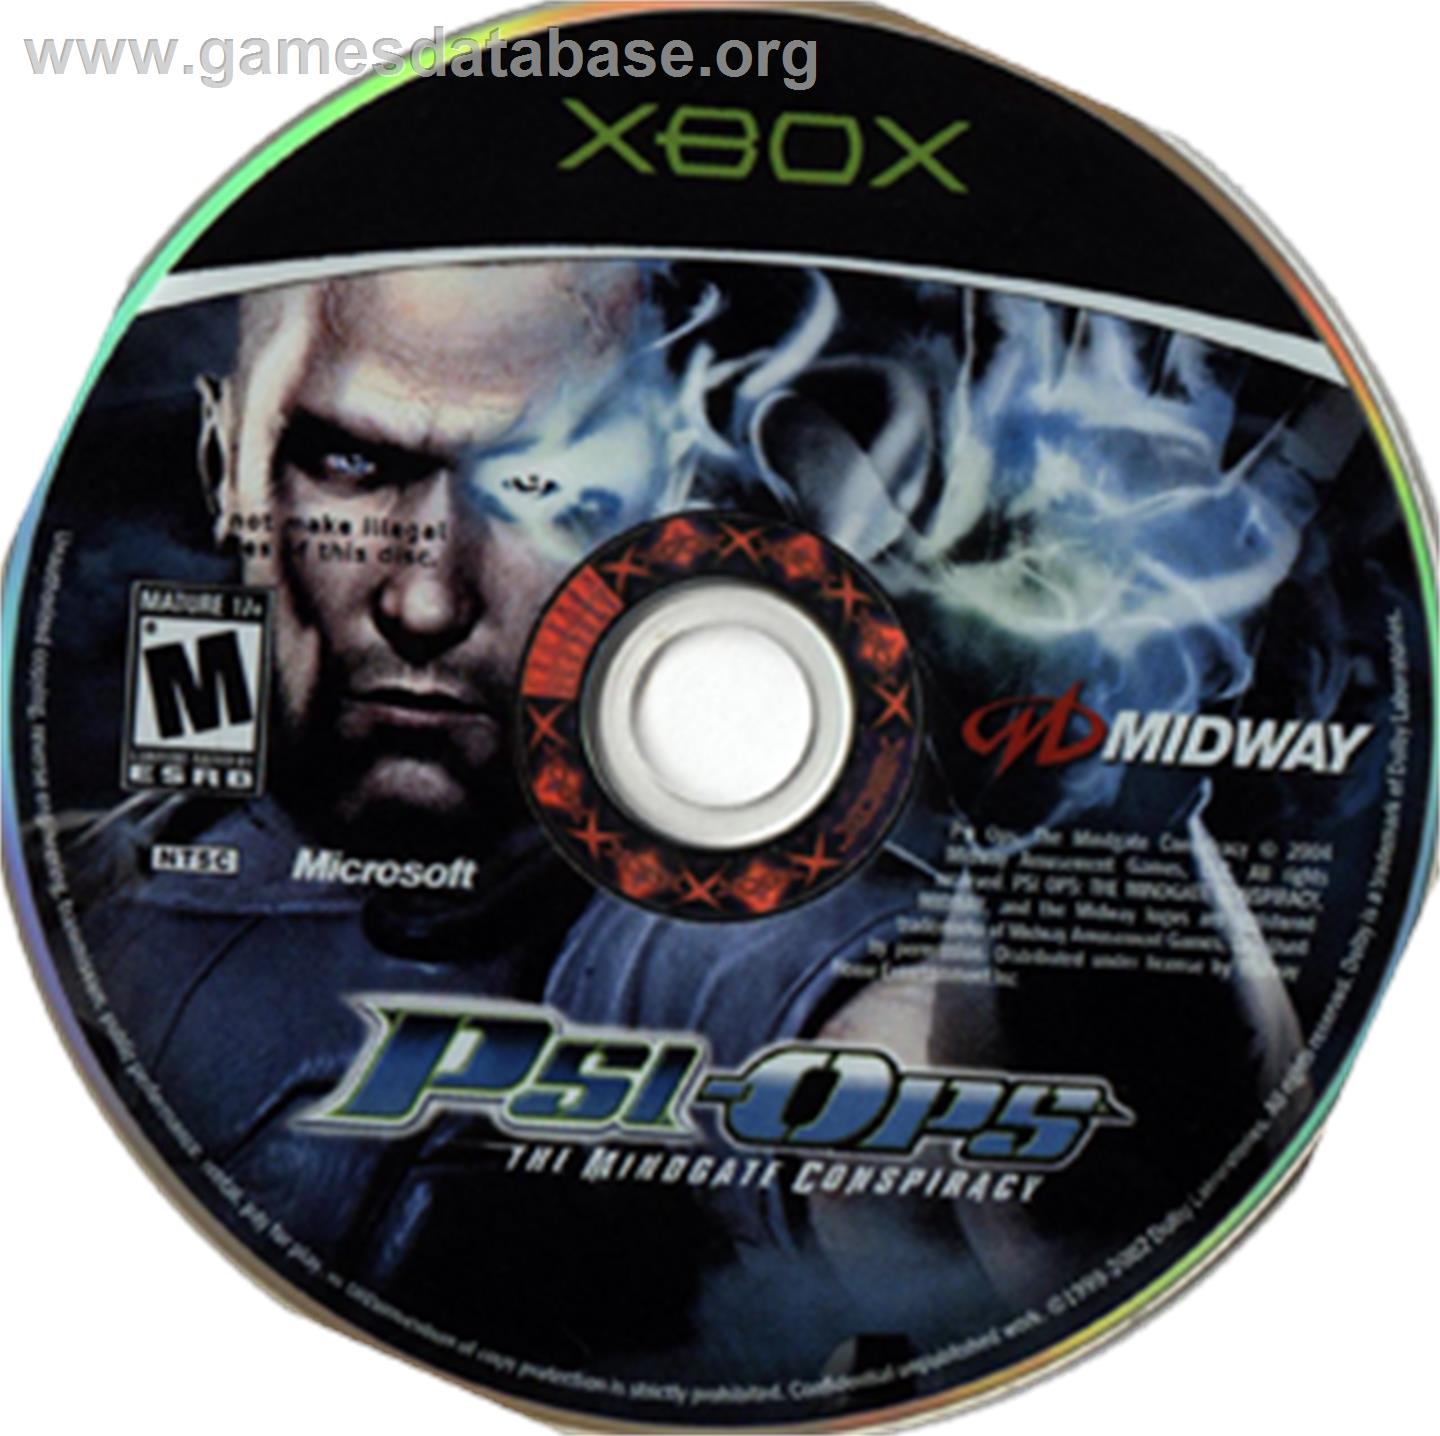 Psi-Ops: The Mindgate Conspiracy - Microsoft Xbox - Artwork - CD